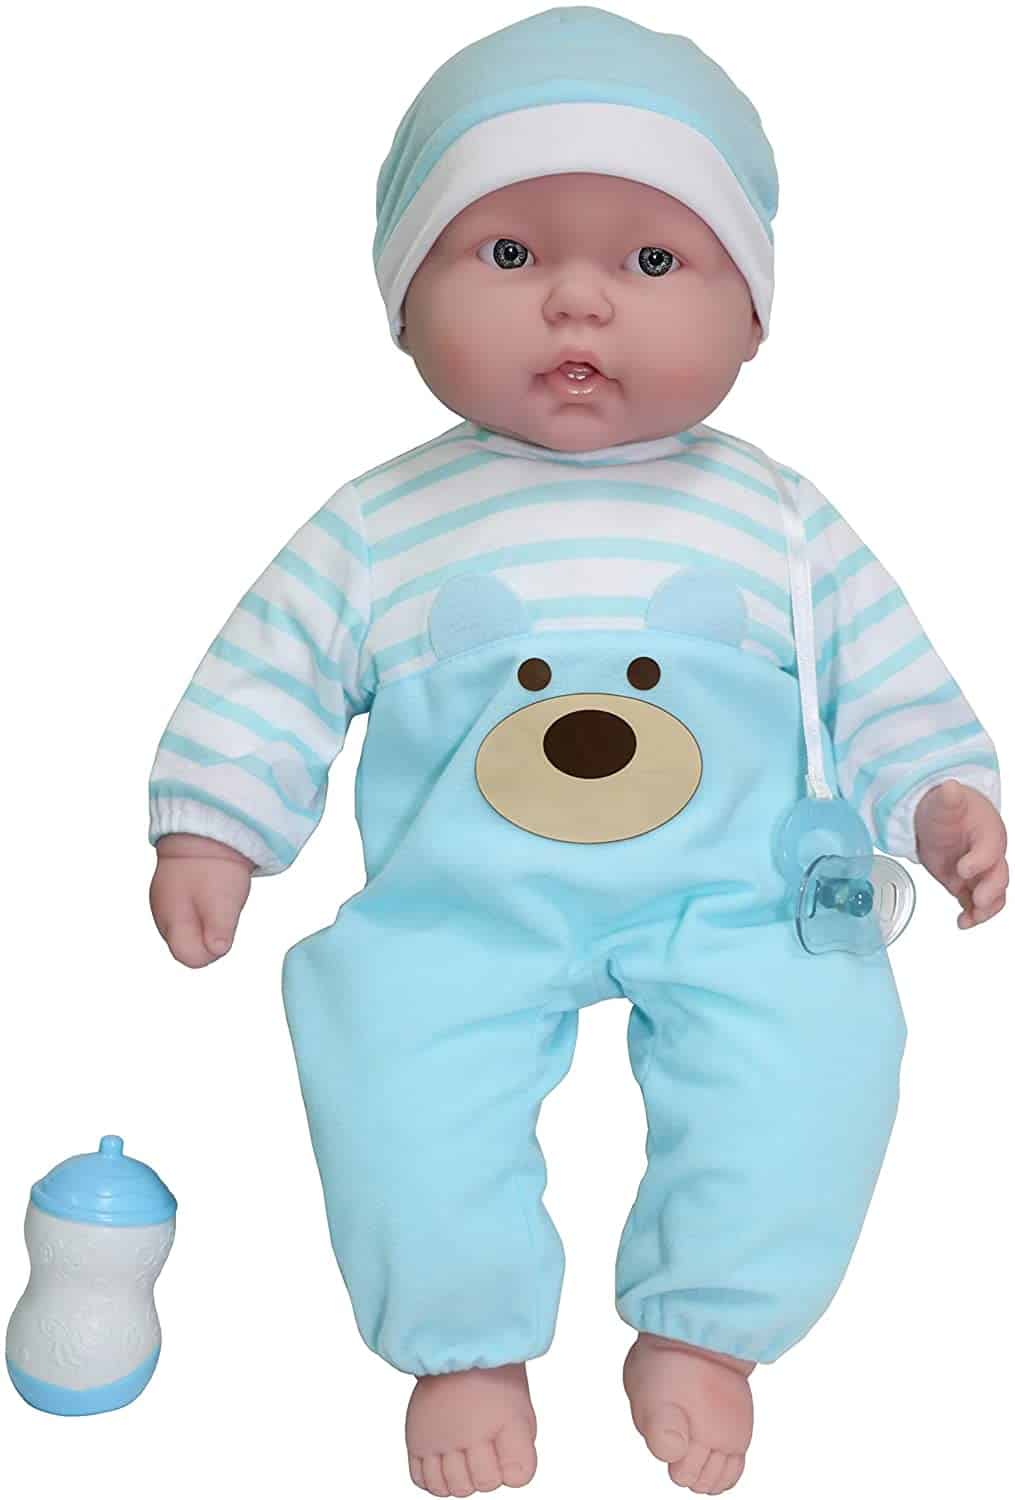 Best baby doll with a fabric body: JC Toys Berenguer soft body